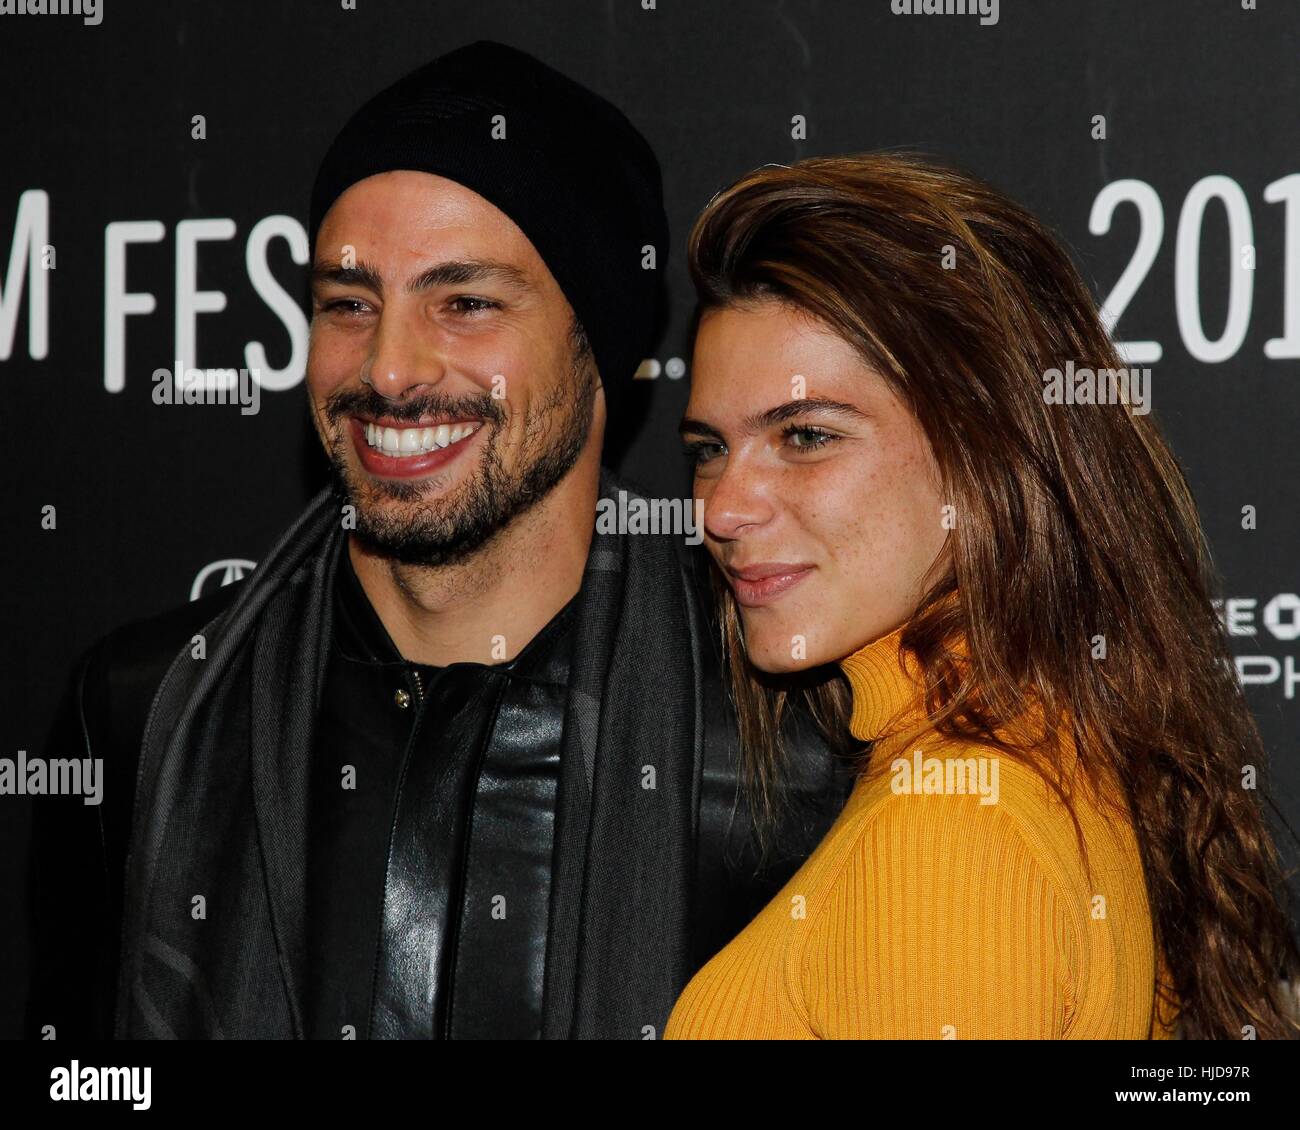 New York, NY, USA. 23rd Jan, 2017. Caua Reymond, Mariana Goldfarb at arrivals for MARJORIE PRIME Premiere at Sundance Film Festival 2017, Eccles Theatre, New York, USA. January 23, 2017. Credit: James Atoa/Everett Collection/Alamy Live News Stock Photo